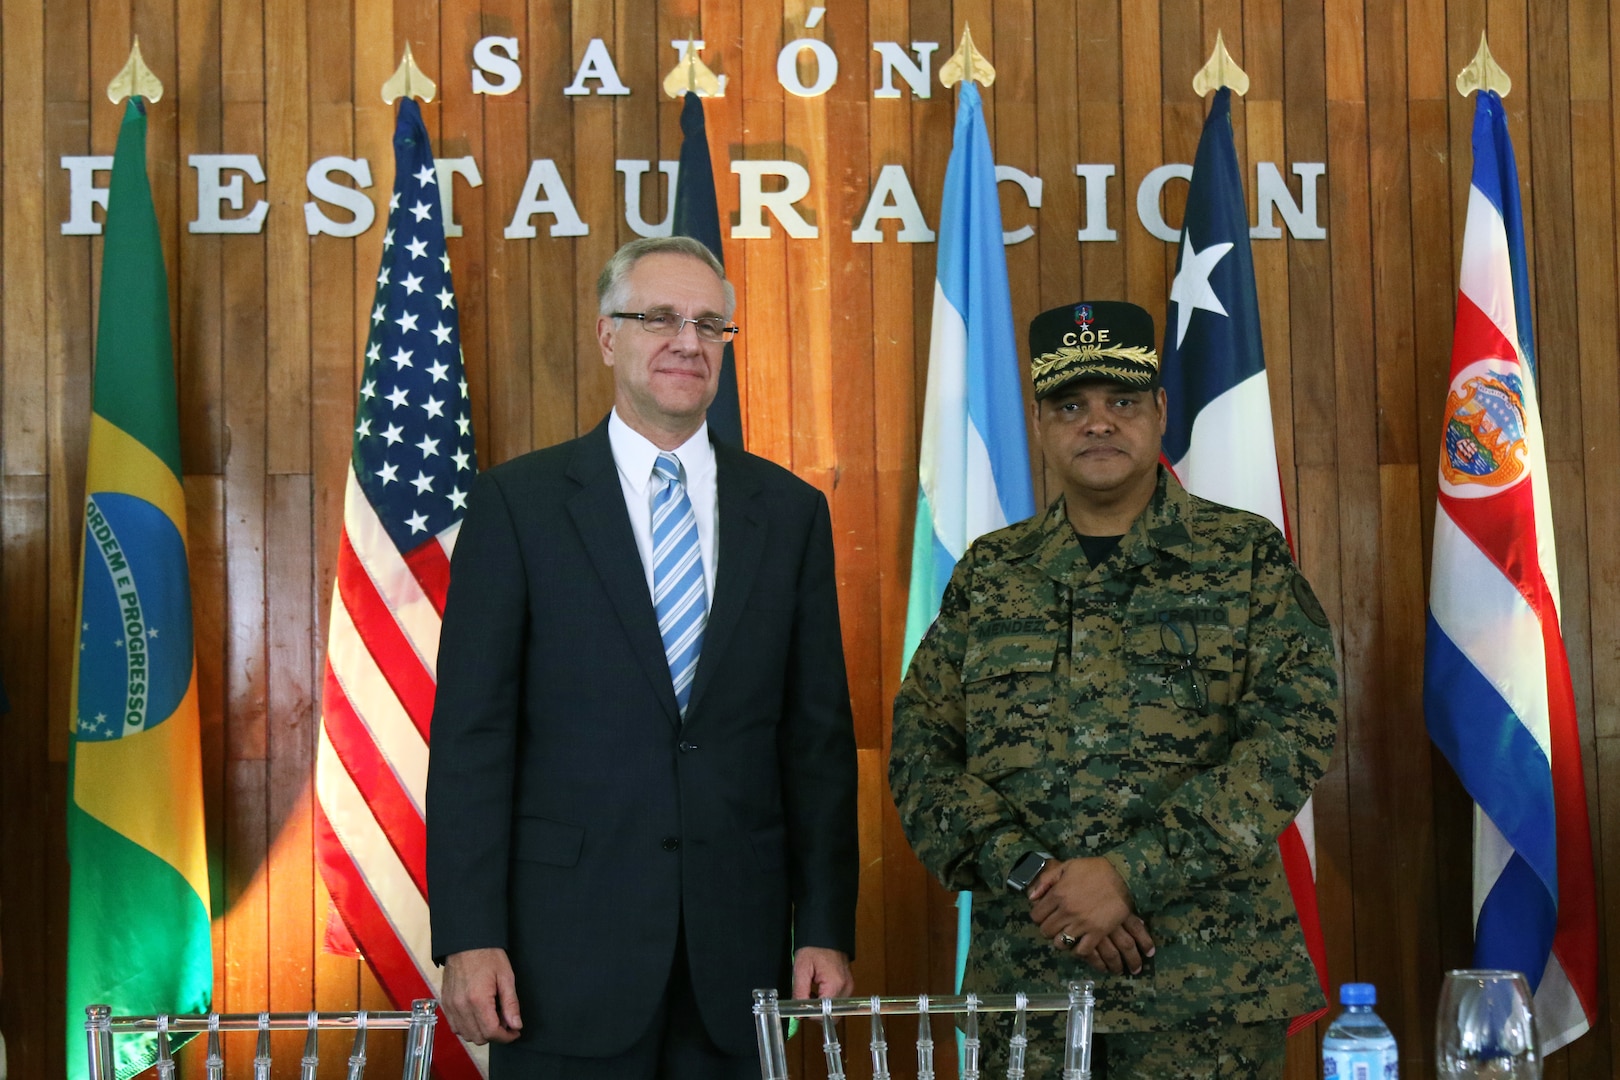 Robert E. Copley, Deputy Chief of Mission at the U.S. Embassy in Santo Domingo, Dominican Republic, poses alongside Brig. Gen. Juan Manuel Mendez Garcia, director of the Emergency Operations Center for the Dominican Republic.